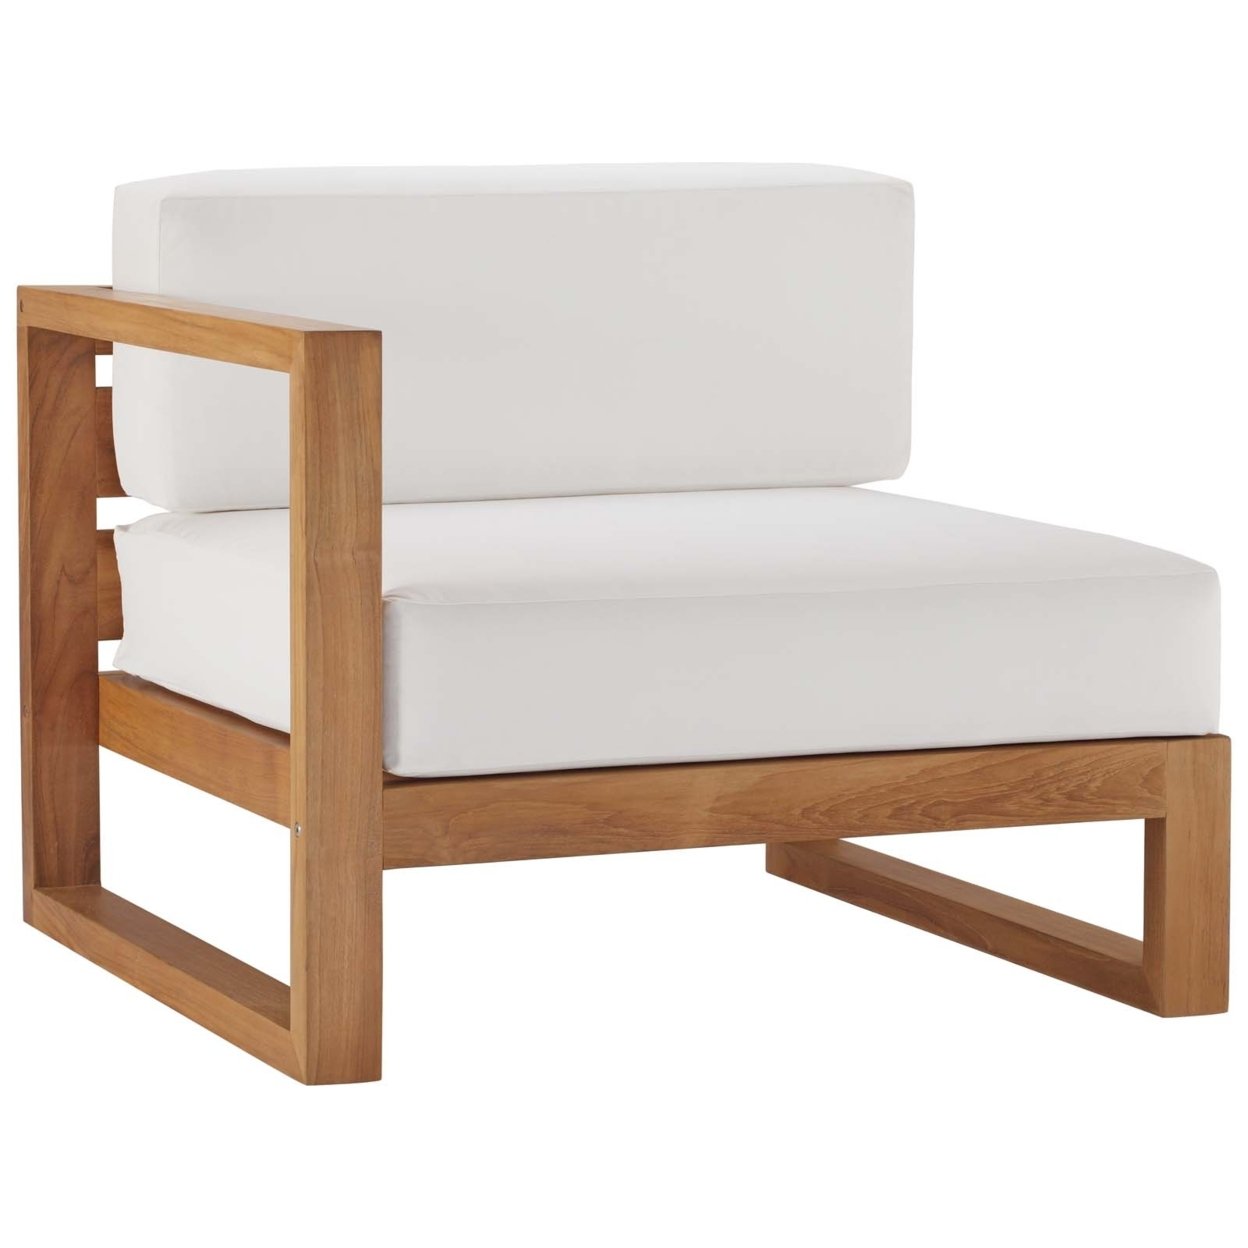 Upland Outdoor Patio Teak Wood Left-Arm Chair, Natural White